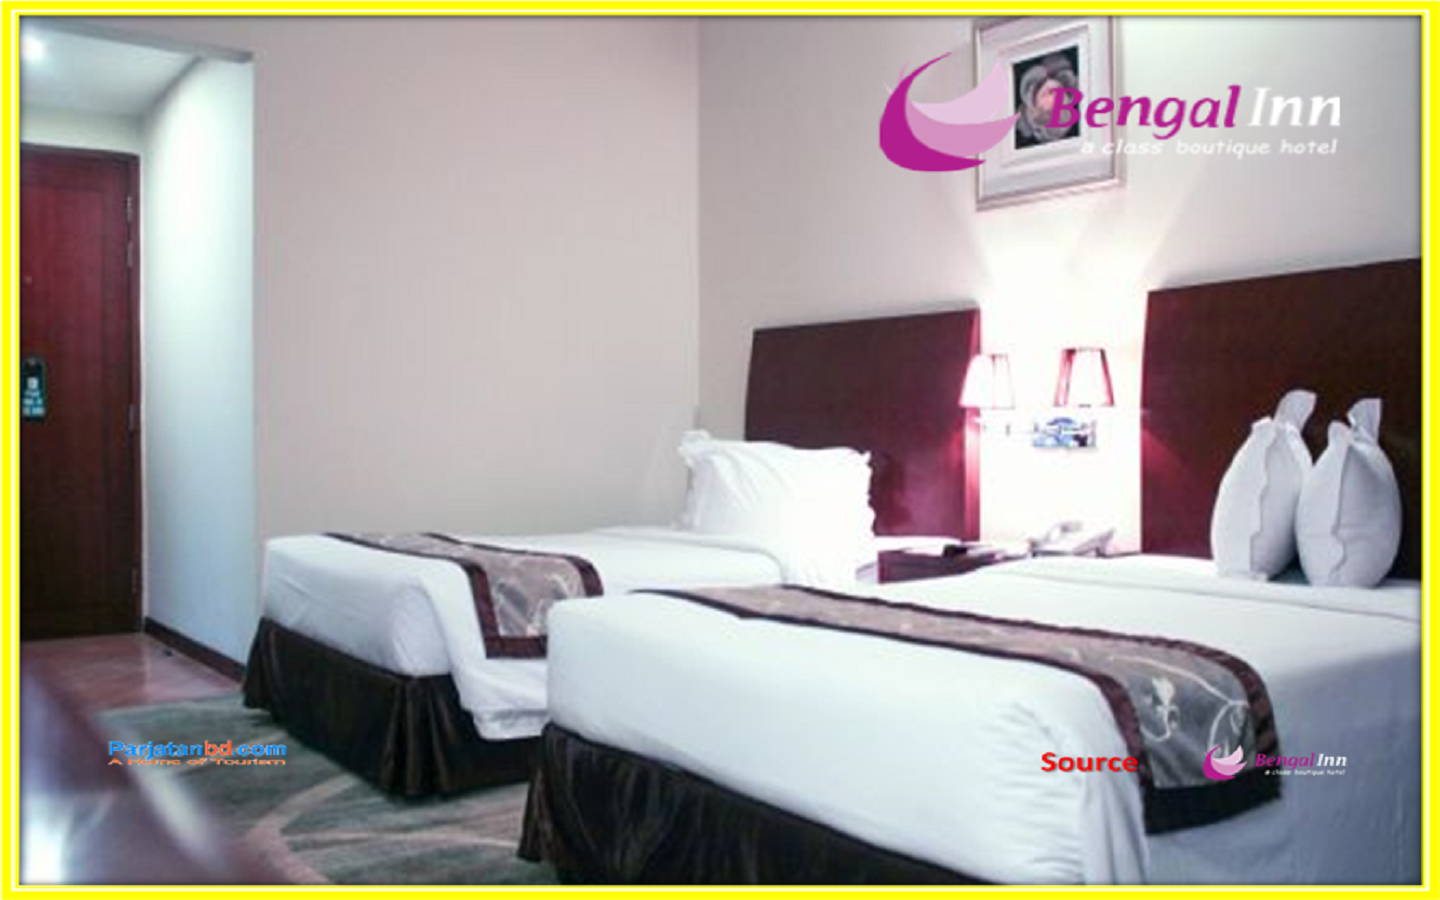 Room Super Deluxe Twin -1, Bengal Inn (A Class Boutique Hotel), Gulshan 1